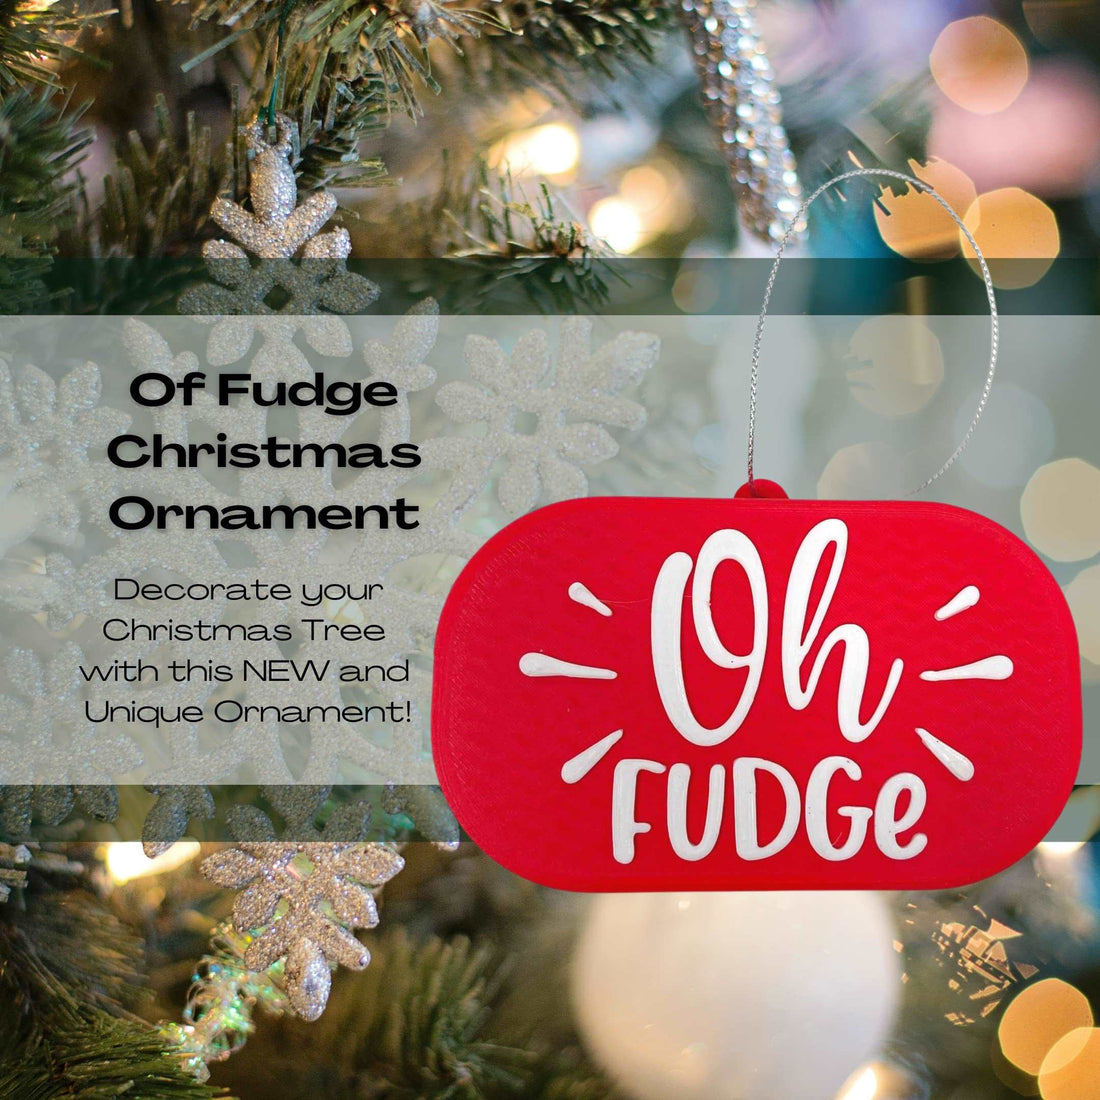 Oh Fudge Christmas Story Soap Ornament - Decorative Holiday Ornament - Made in The USA